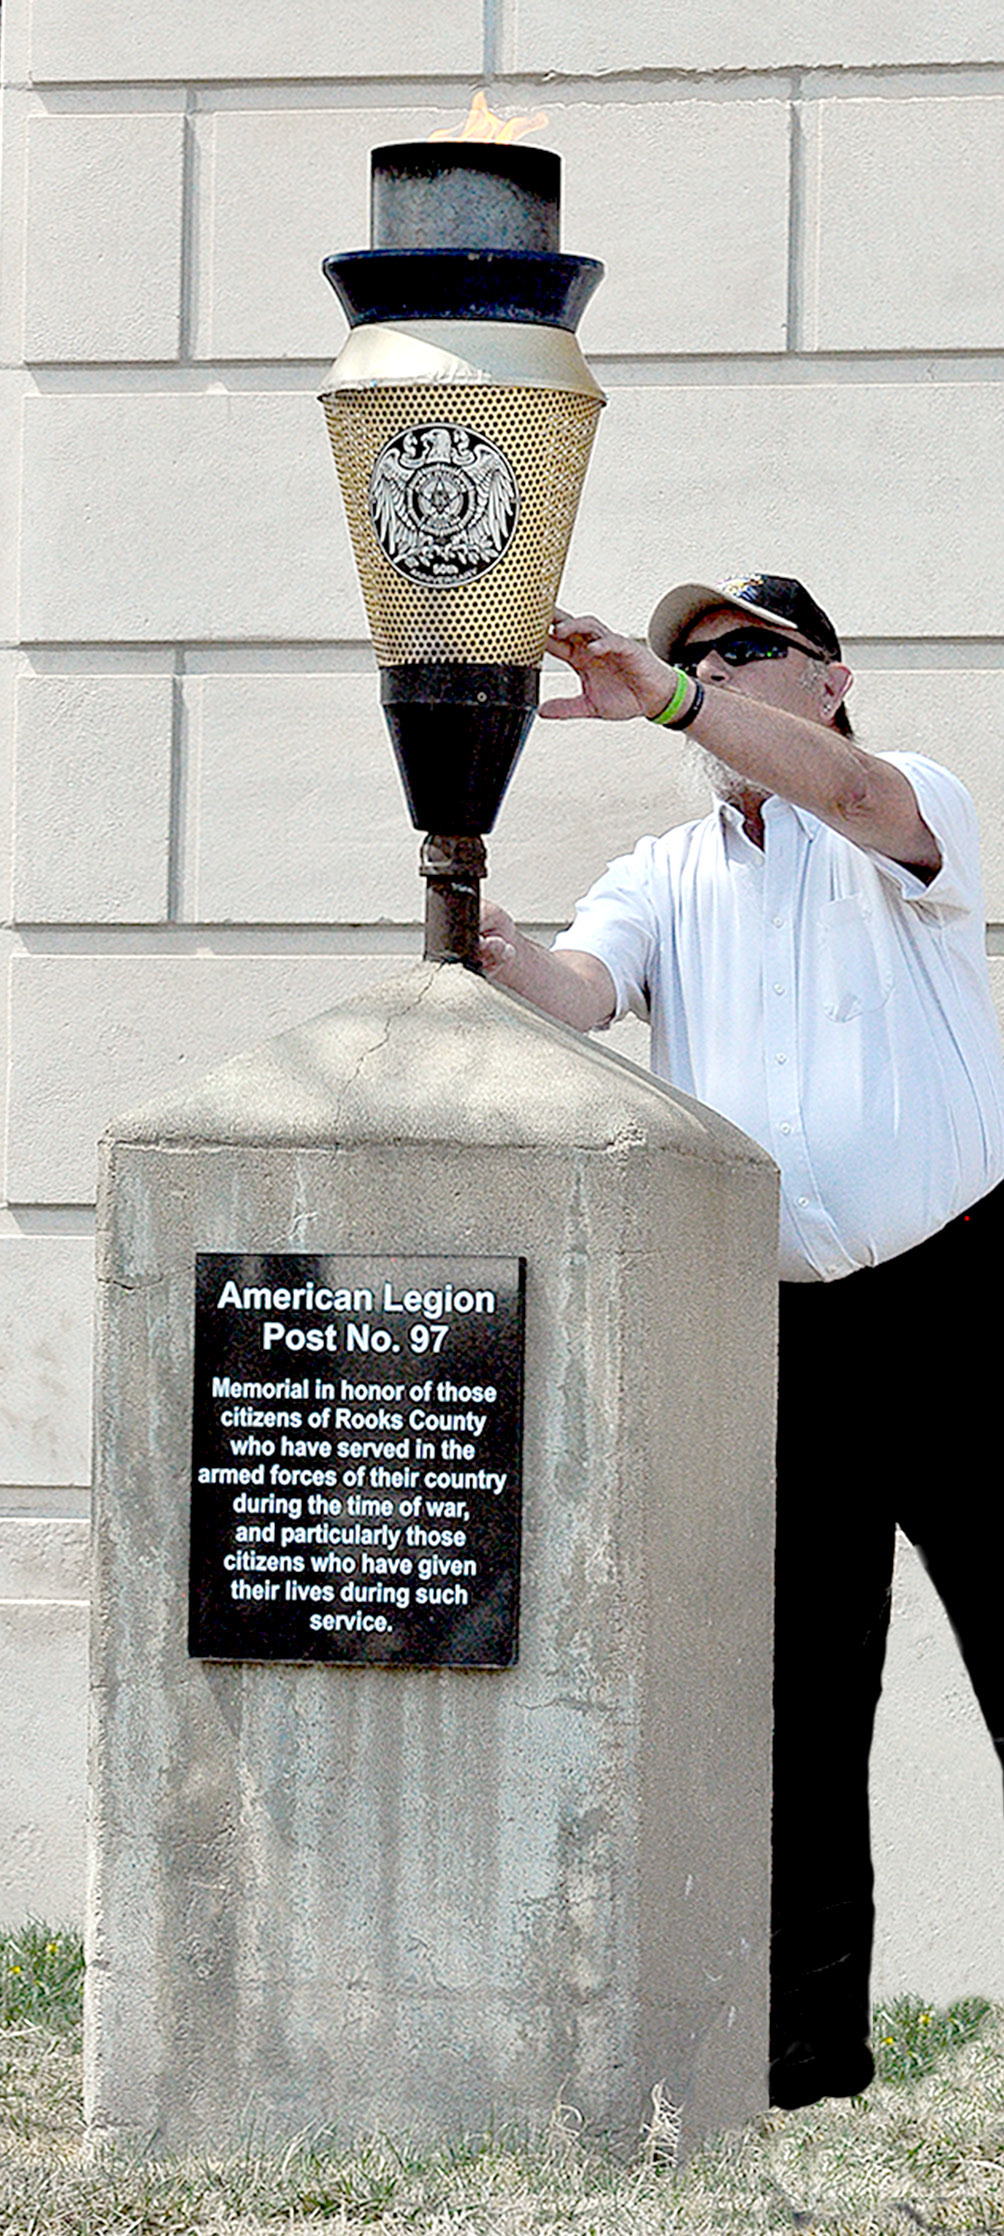 AMERICAN LEGION POST NO. 97 COMMANDER Mack Palmer lights the eternal flame during the Centennial Celebration of the Rooks County Courthouse on Thursday, April 20th. The Post installed the eternal flame in honor of the Rooks County citizens who served in the armed forces.